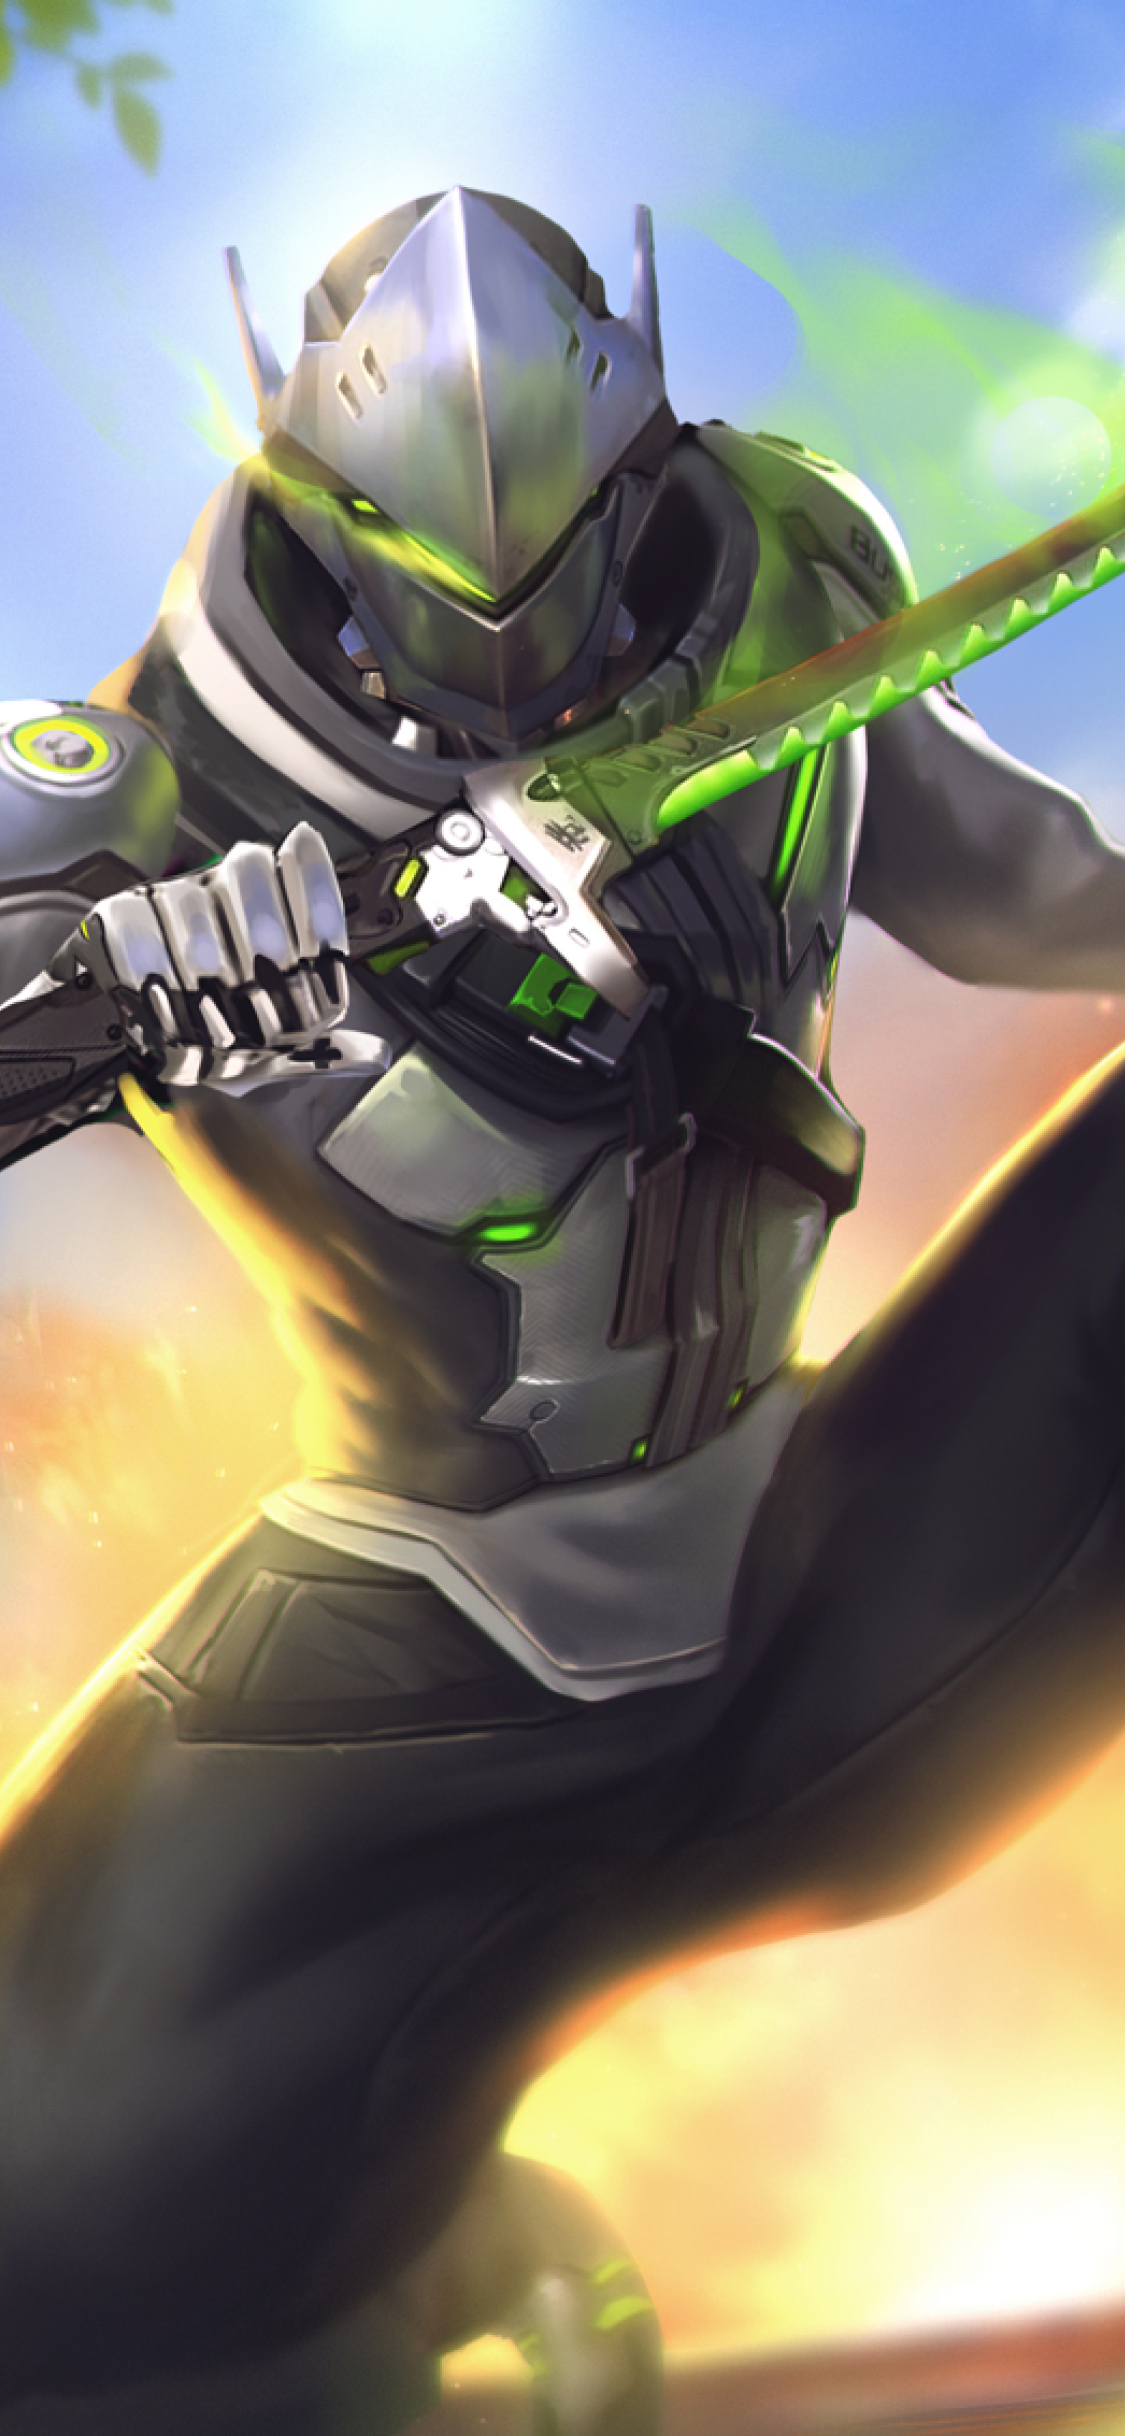 1125x2436 Overwatch Genji Iphone Xs Iphone 10 Iphone X Wallpaper Hd Games 4k Wallpapers Images Photos And Background